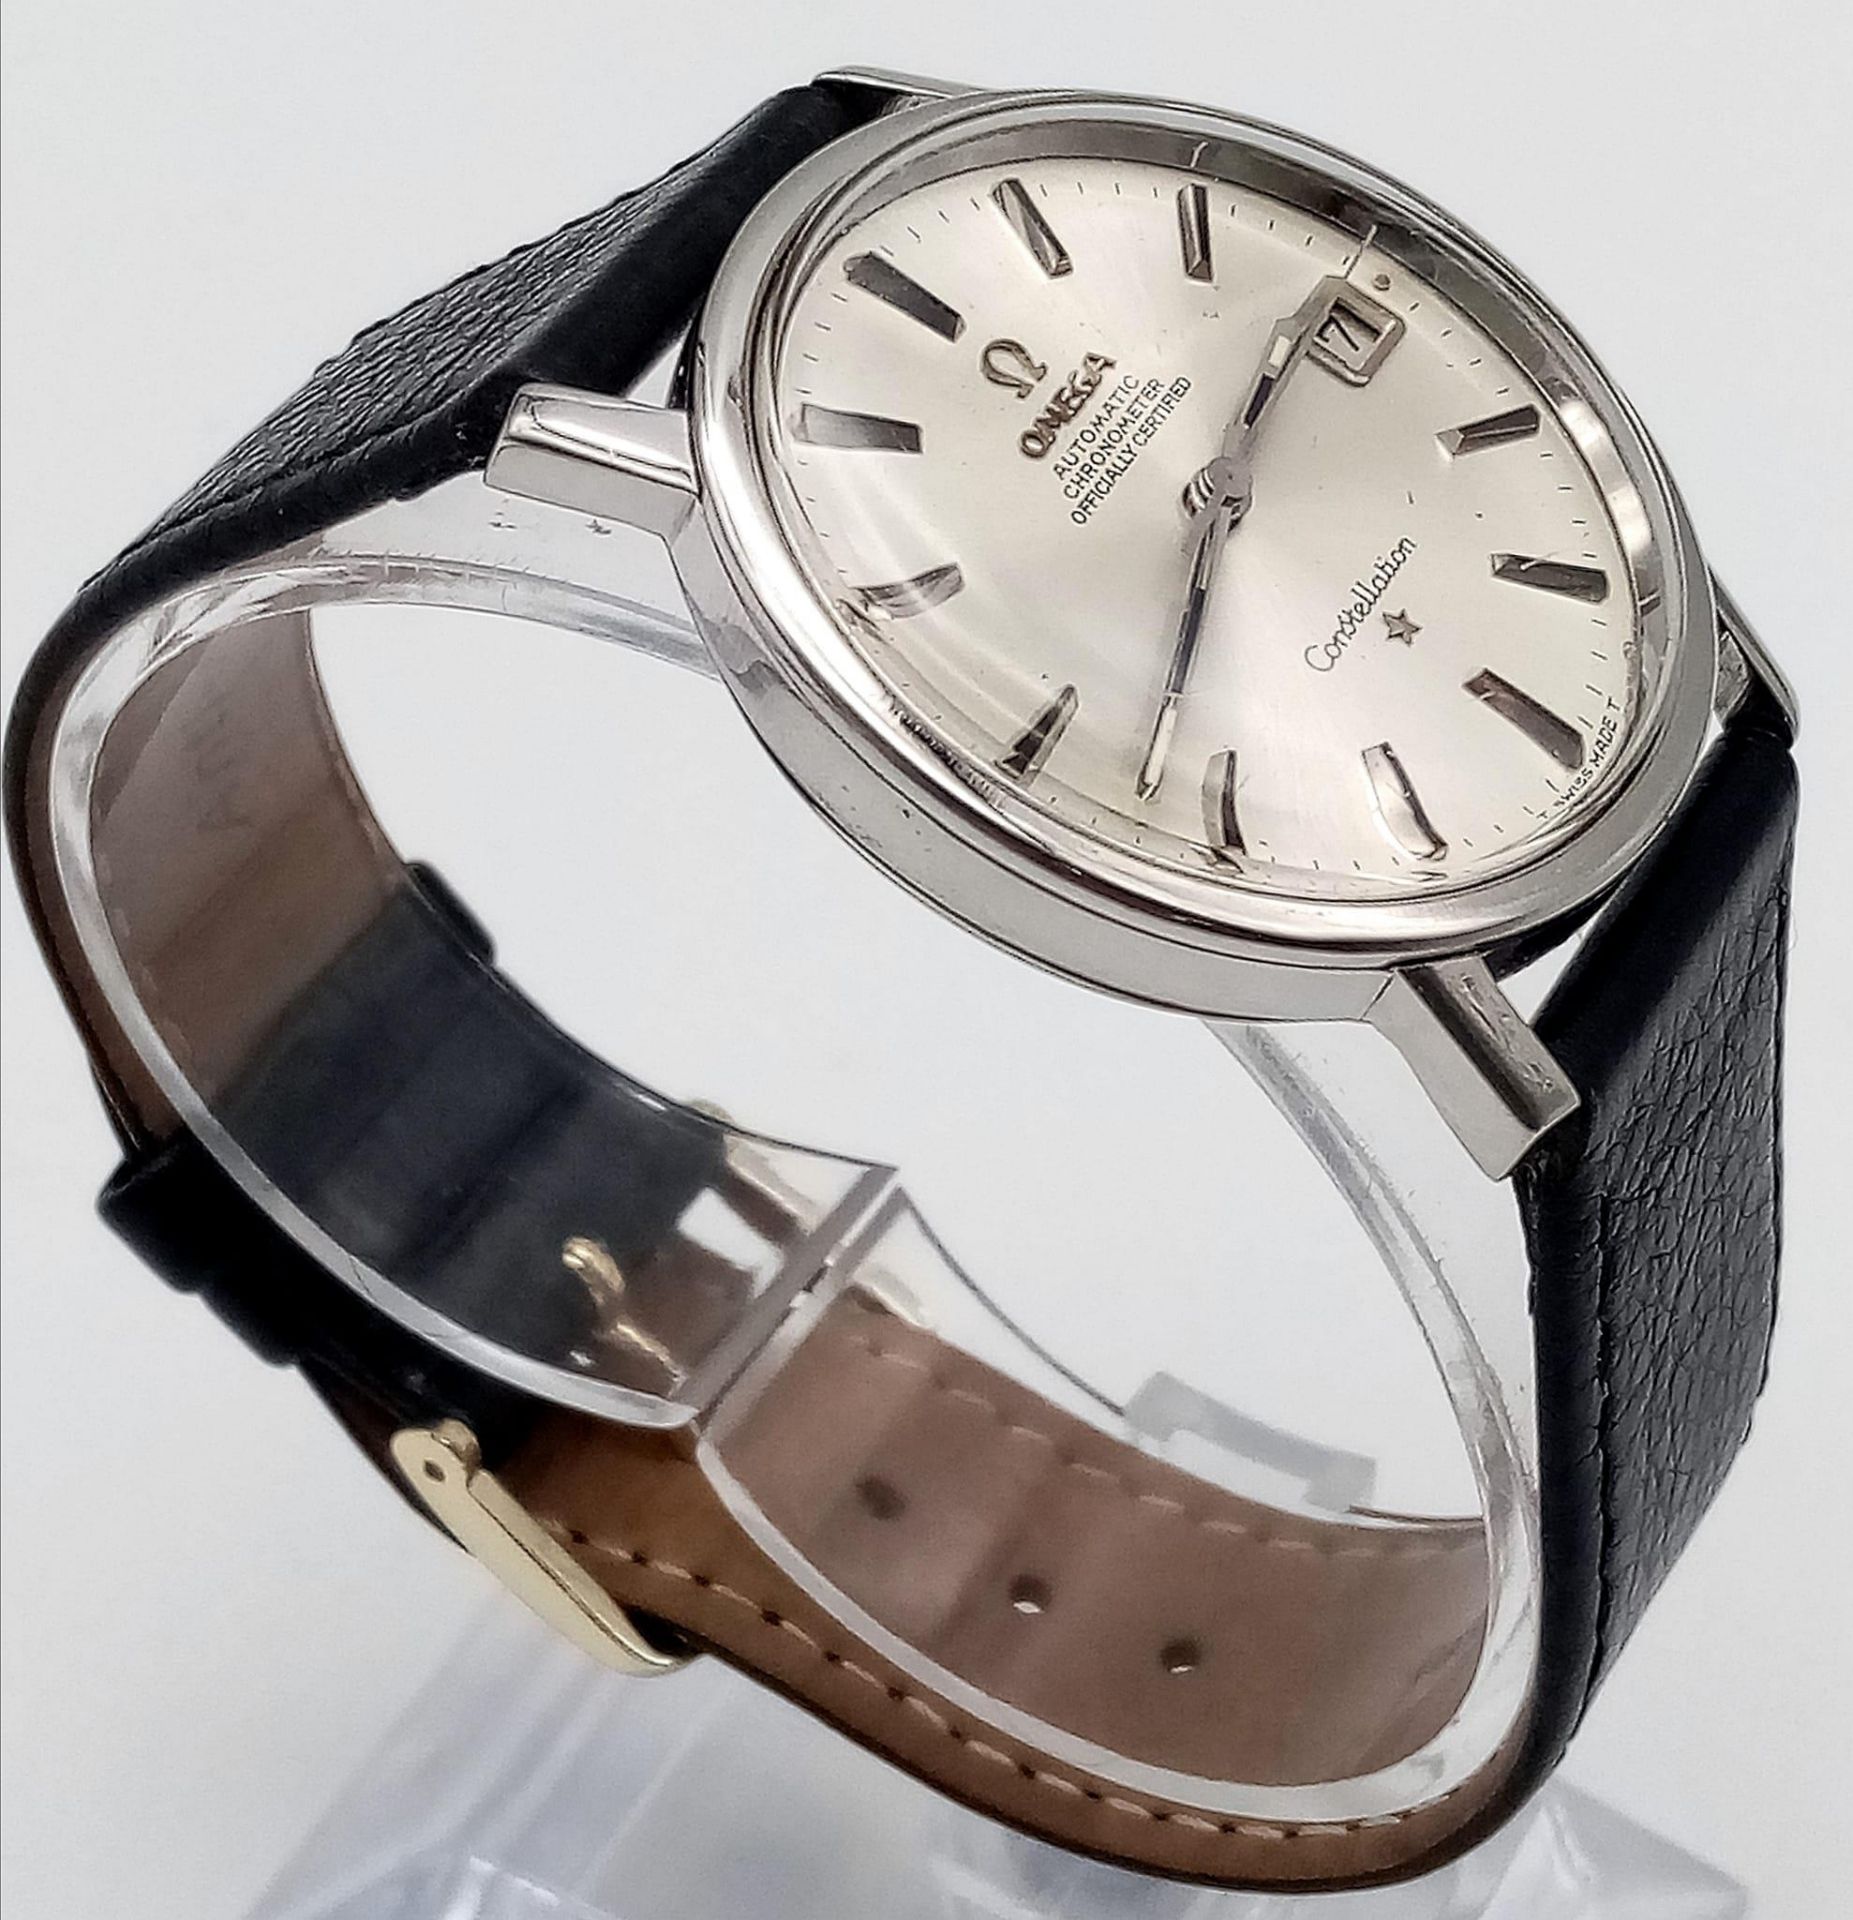 Omega Constellation Chronometer Men's Watch. Automatic movement, leather strap, 32mm dial. Circa - Image 6 of 13